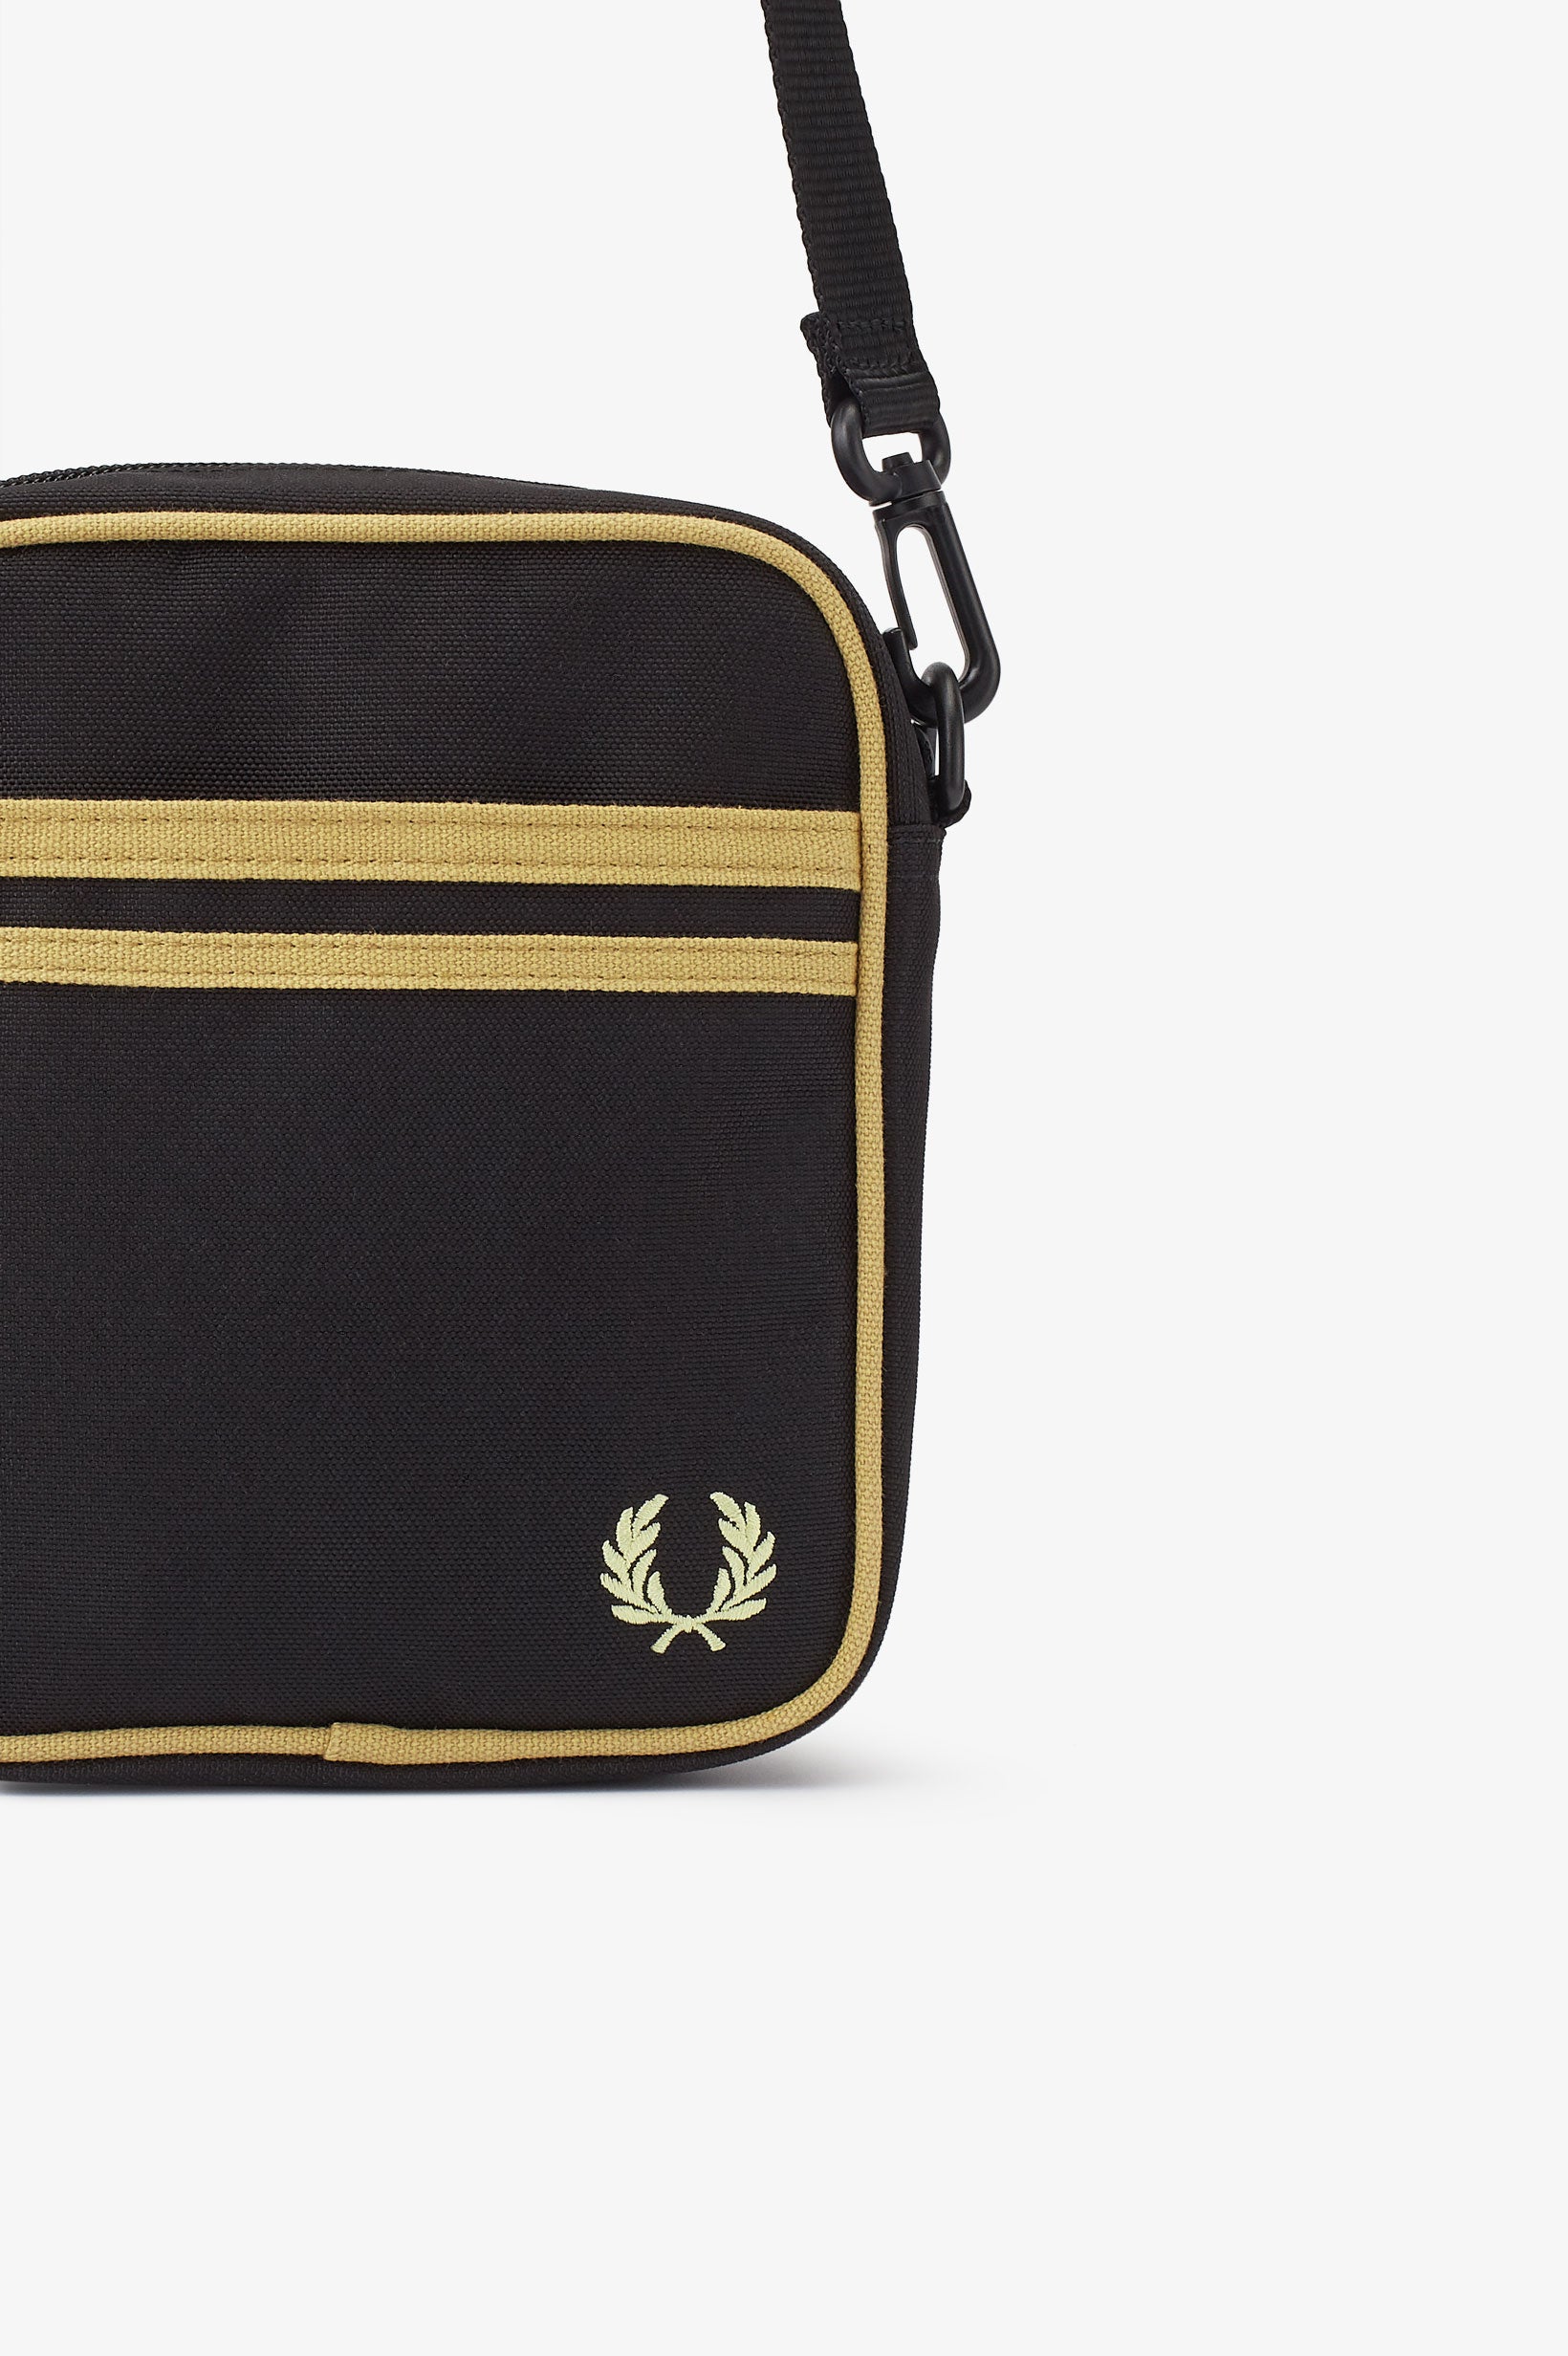 Nylon Twill Leather Coin Purse - Black / Gold | Accessories | Hats,  Wallets, Purses, Socks & Jewellery | Fred Perry US